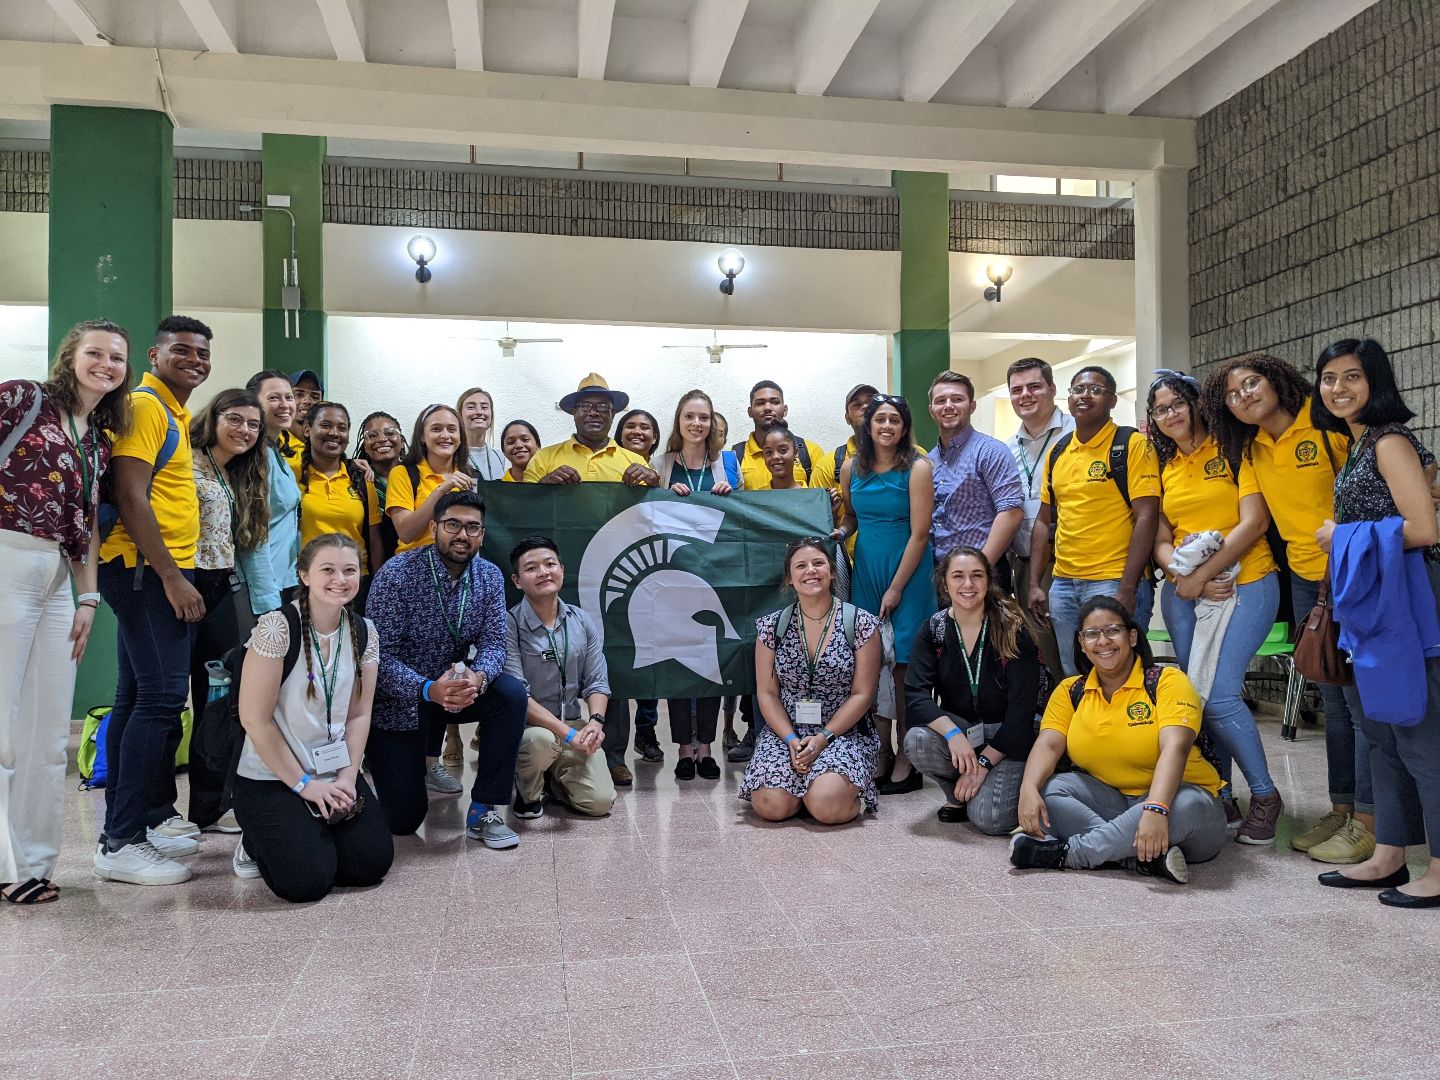 Group shot with Spartan flag in the Dominican Republic